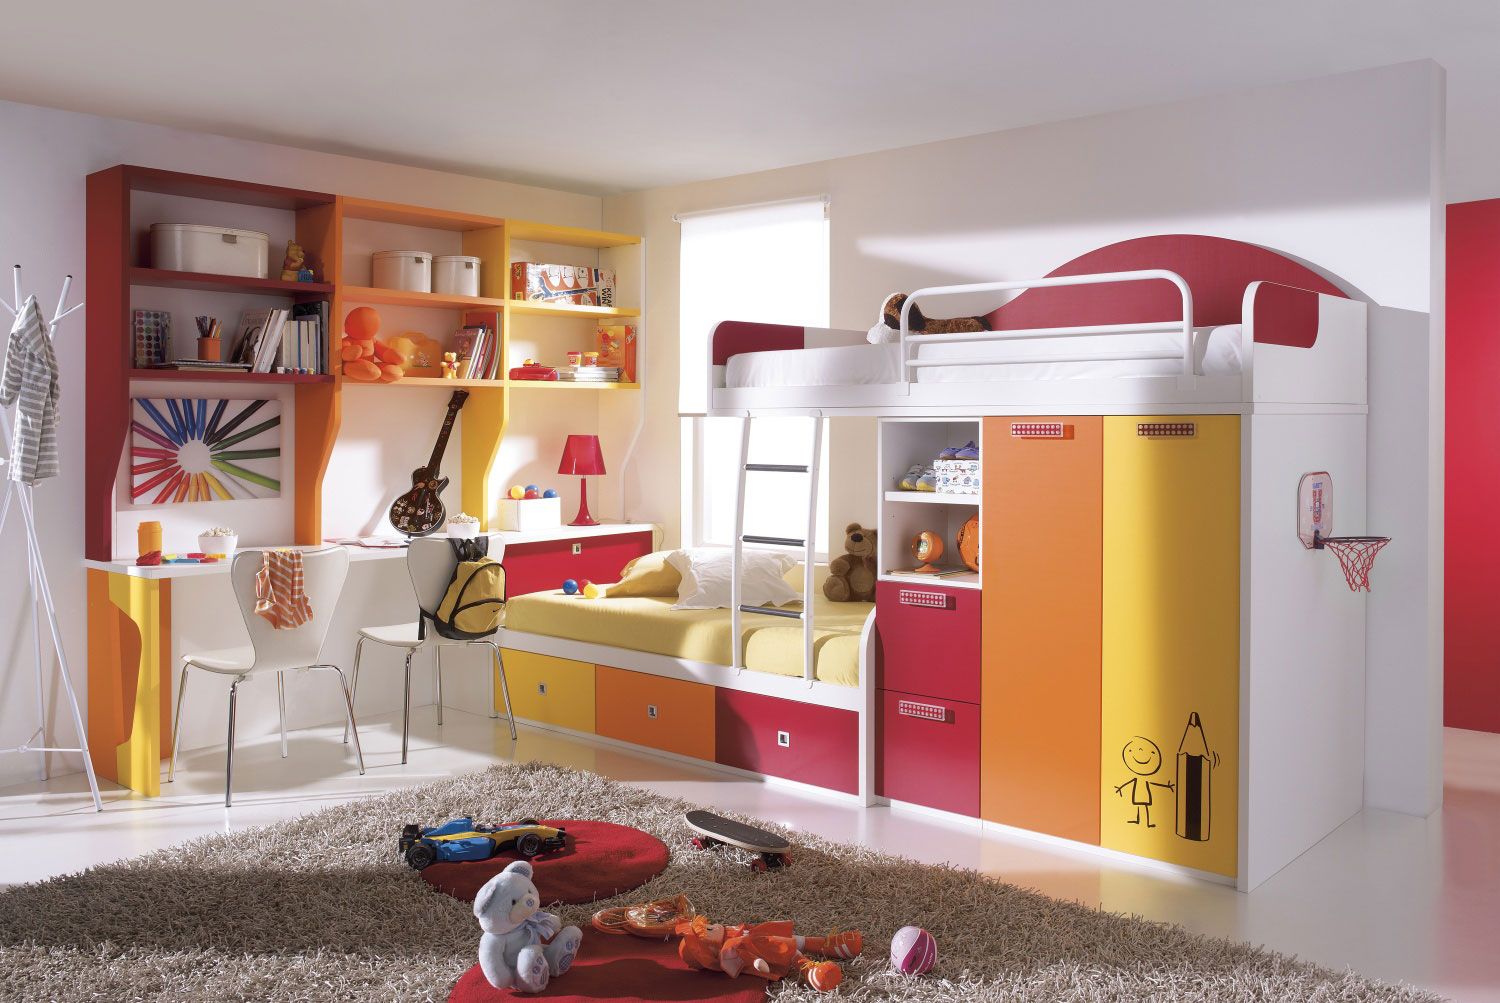 Kids Bedroom Room Amusing Kids Bedroom With Kids Room Storage Completed With Bunk Bed Combined With Cupboards In Colorful Also Furnished With Desk And Chairs Kids Room The Two Ideas For Making The Kids Room Storage